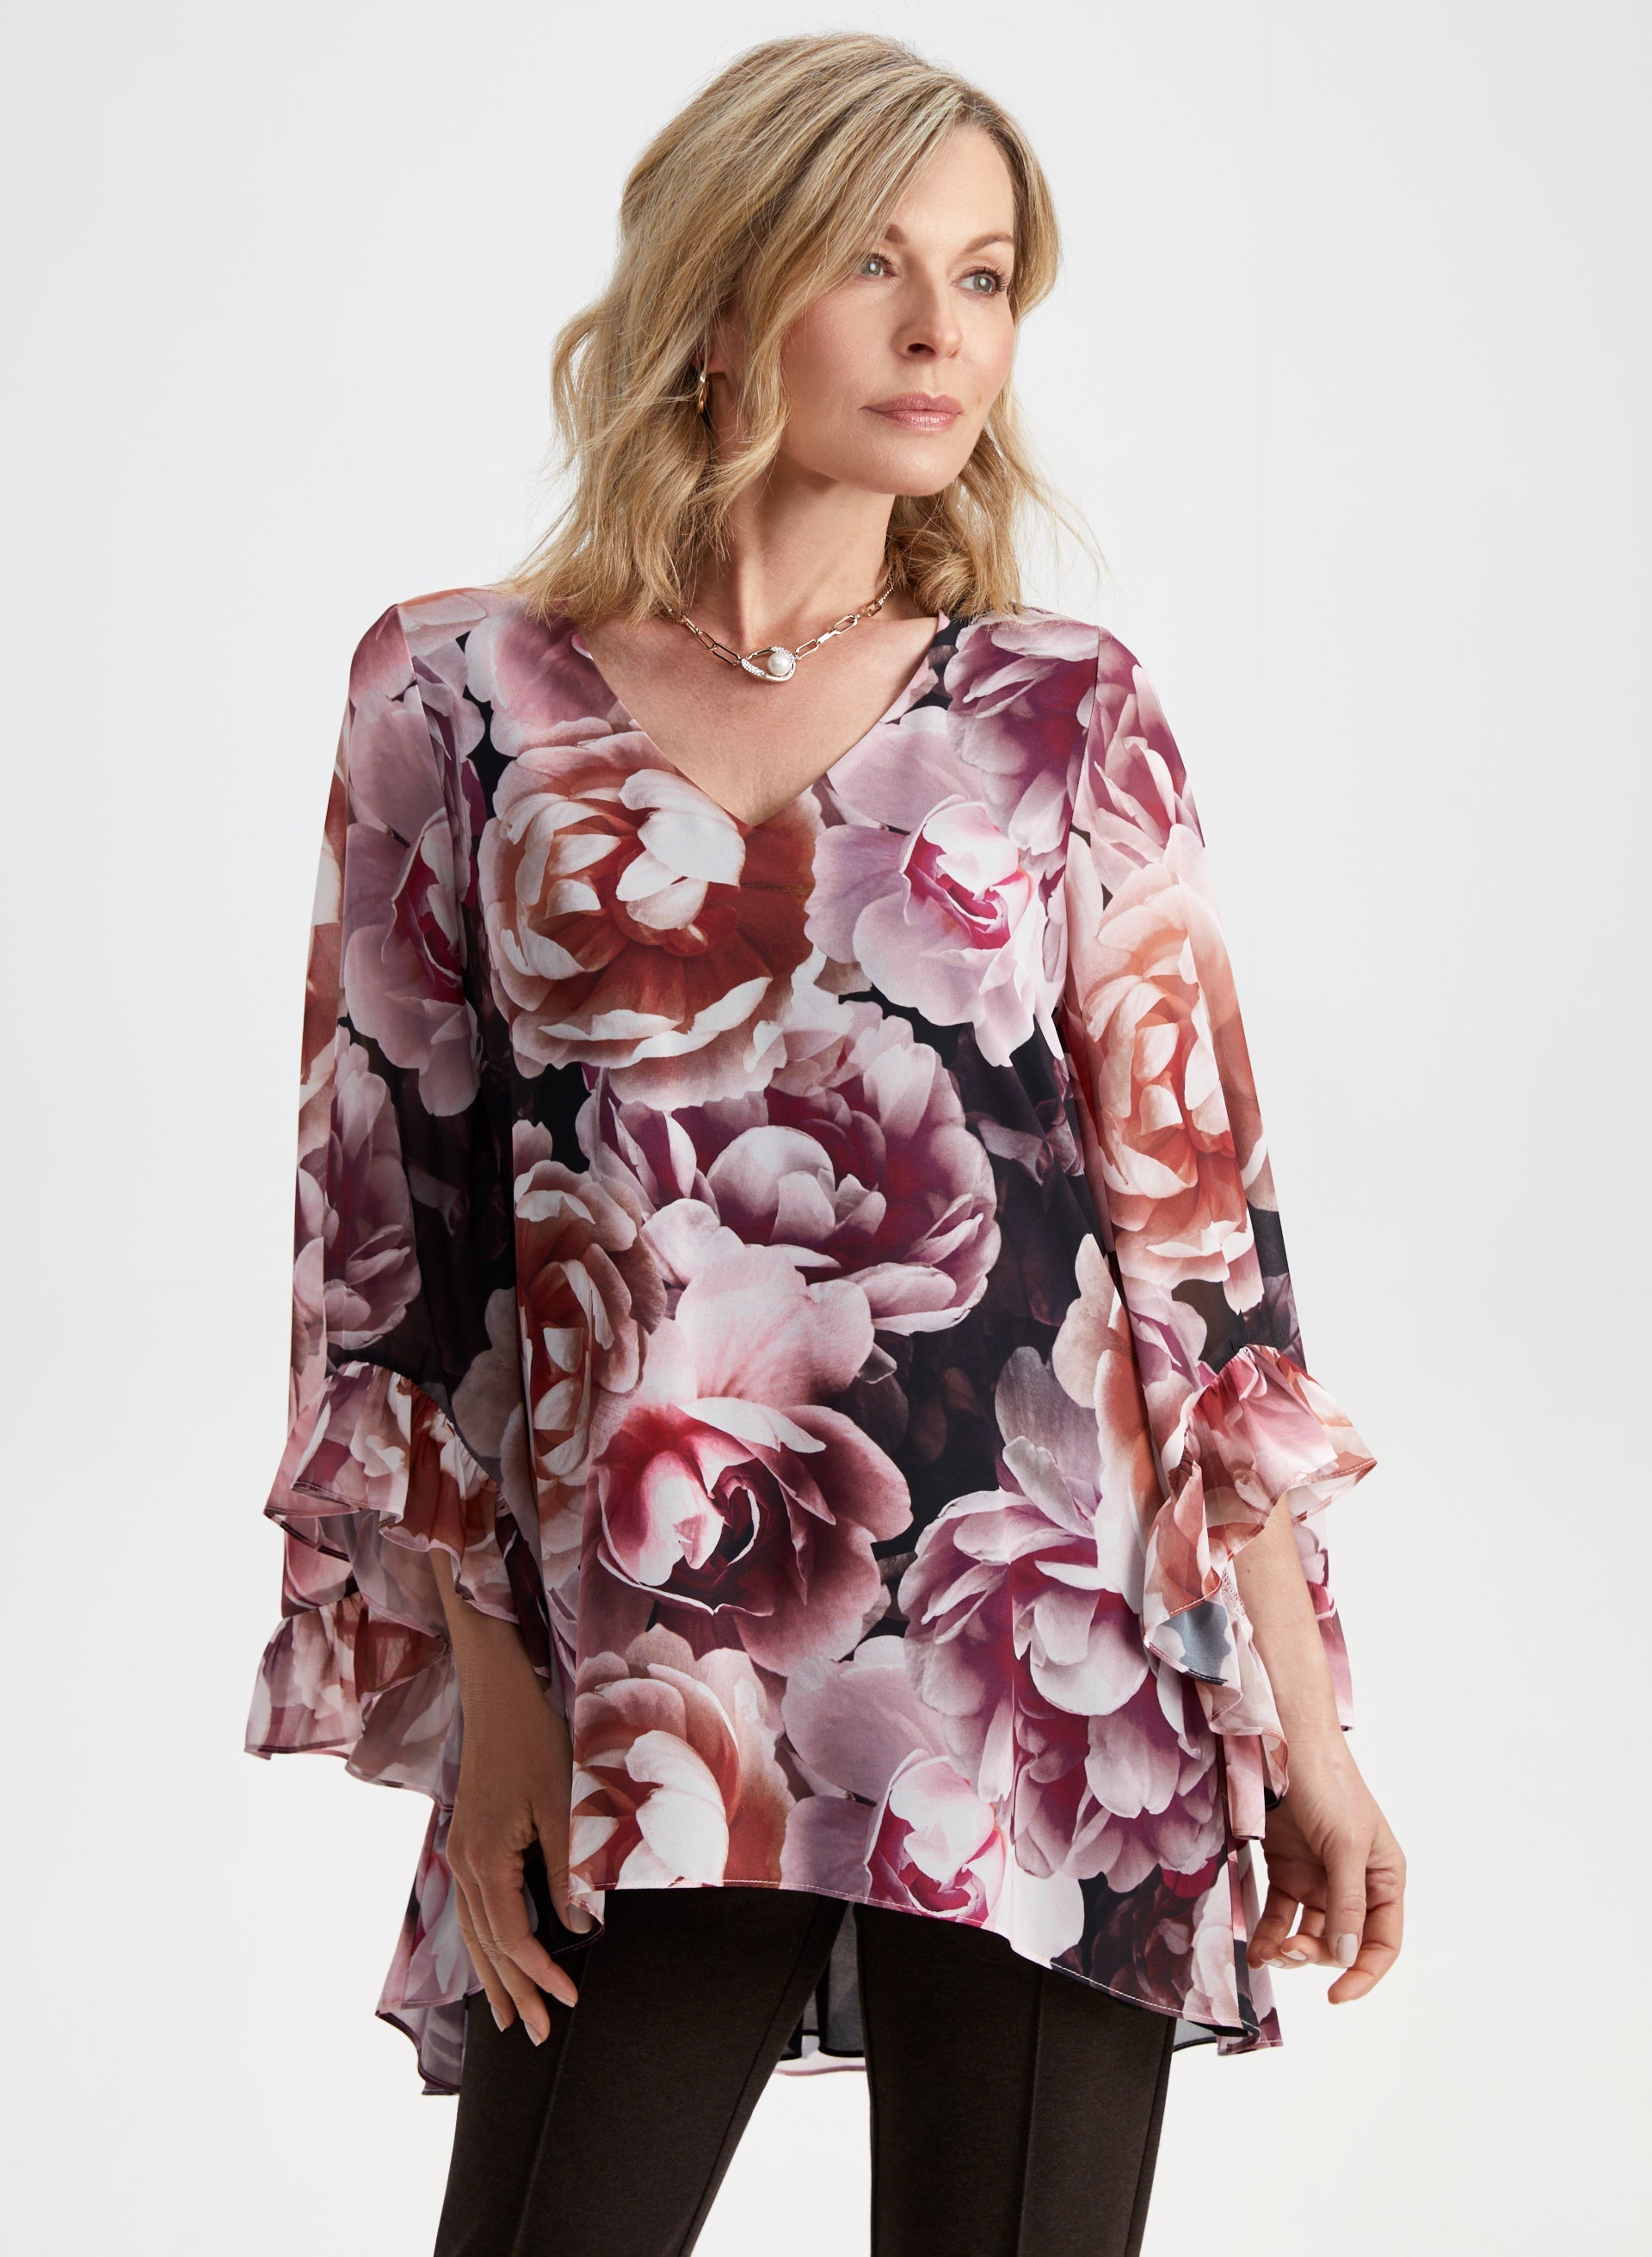 Catherines 3X Top 26-28 Floral Boho Paisley 3/4 Sleeve Plus Blouse